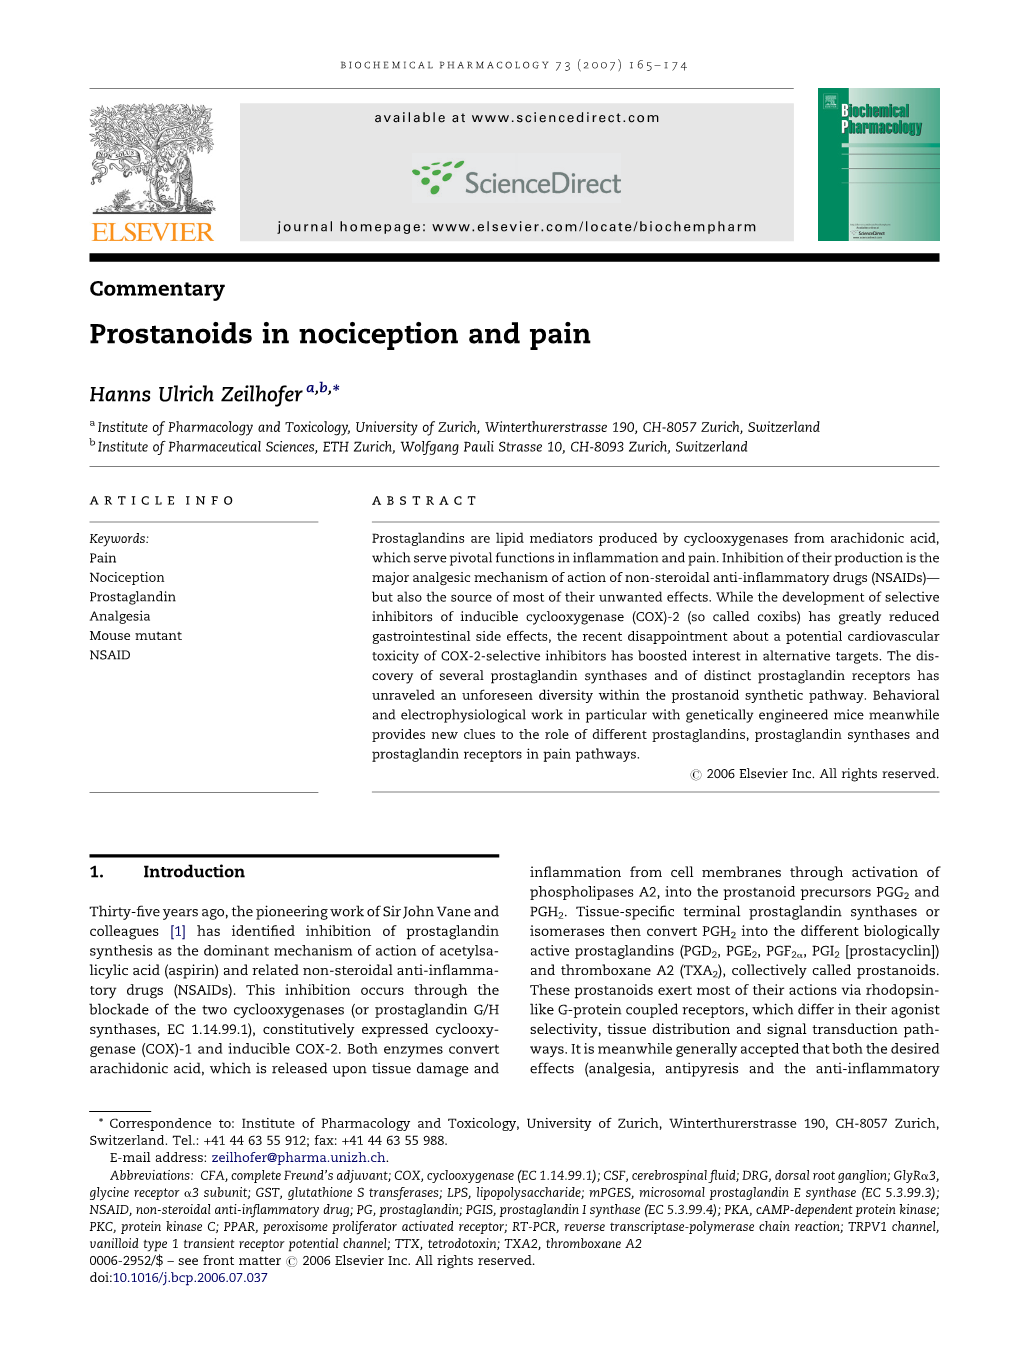 Prostanoids in Nociception and Pain